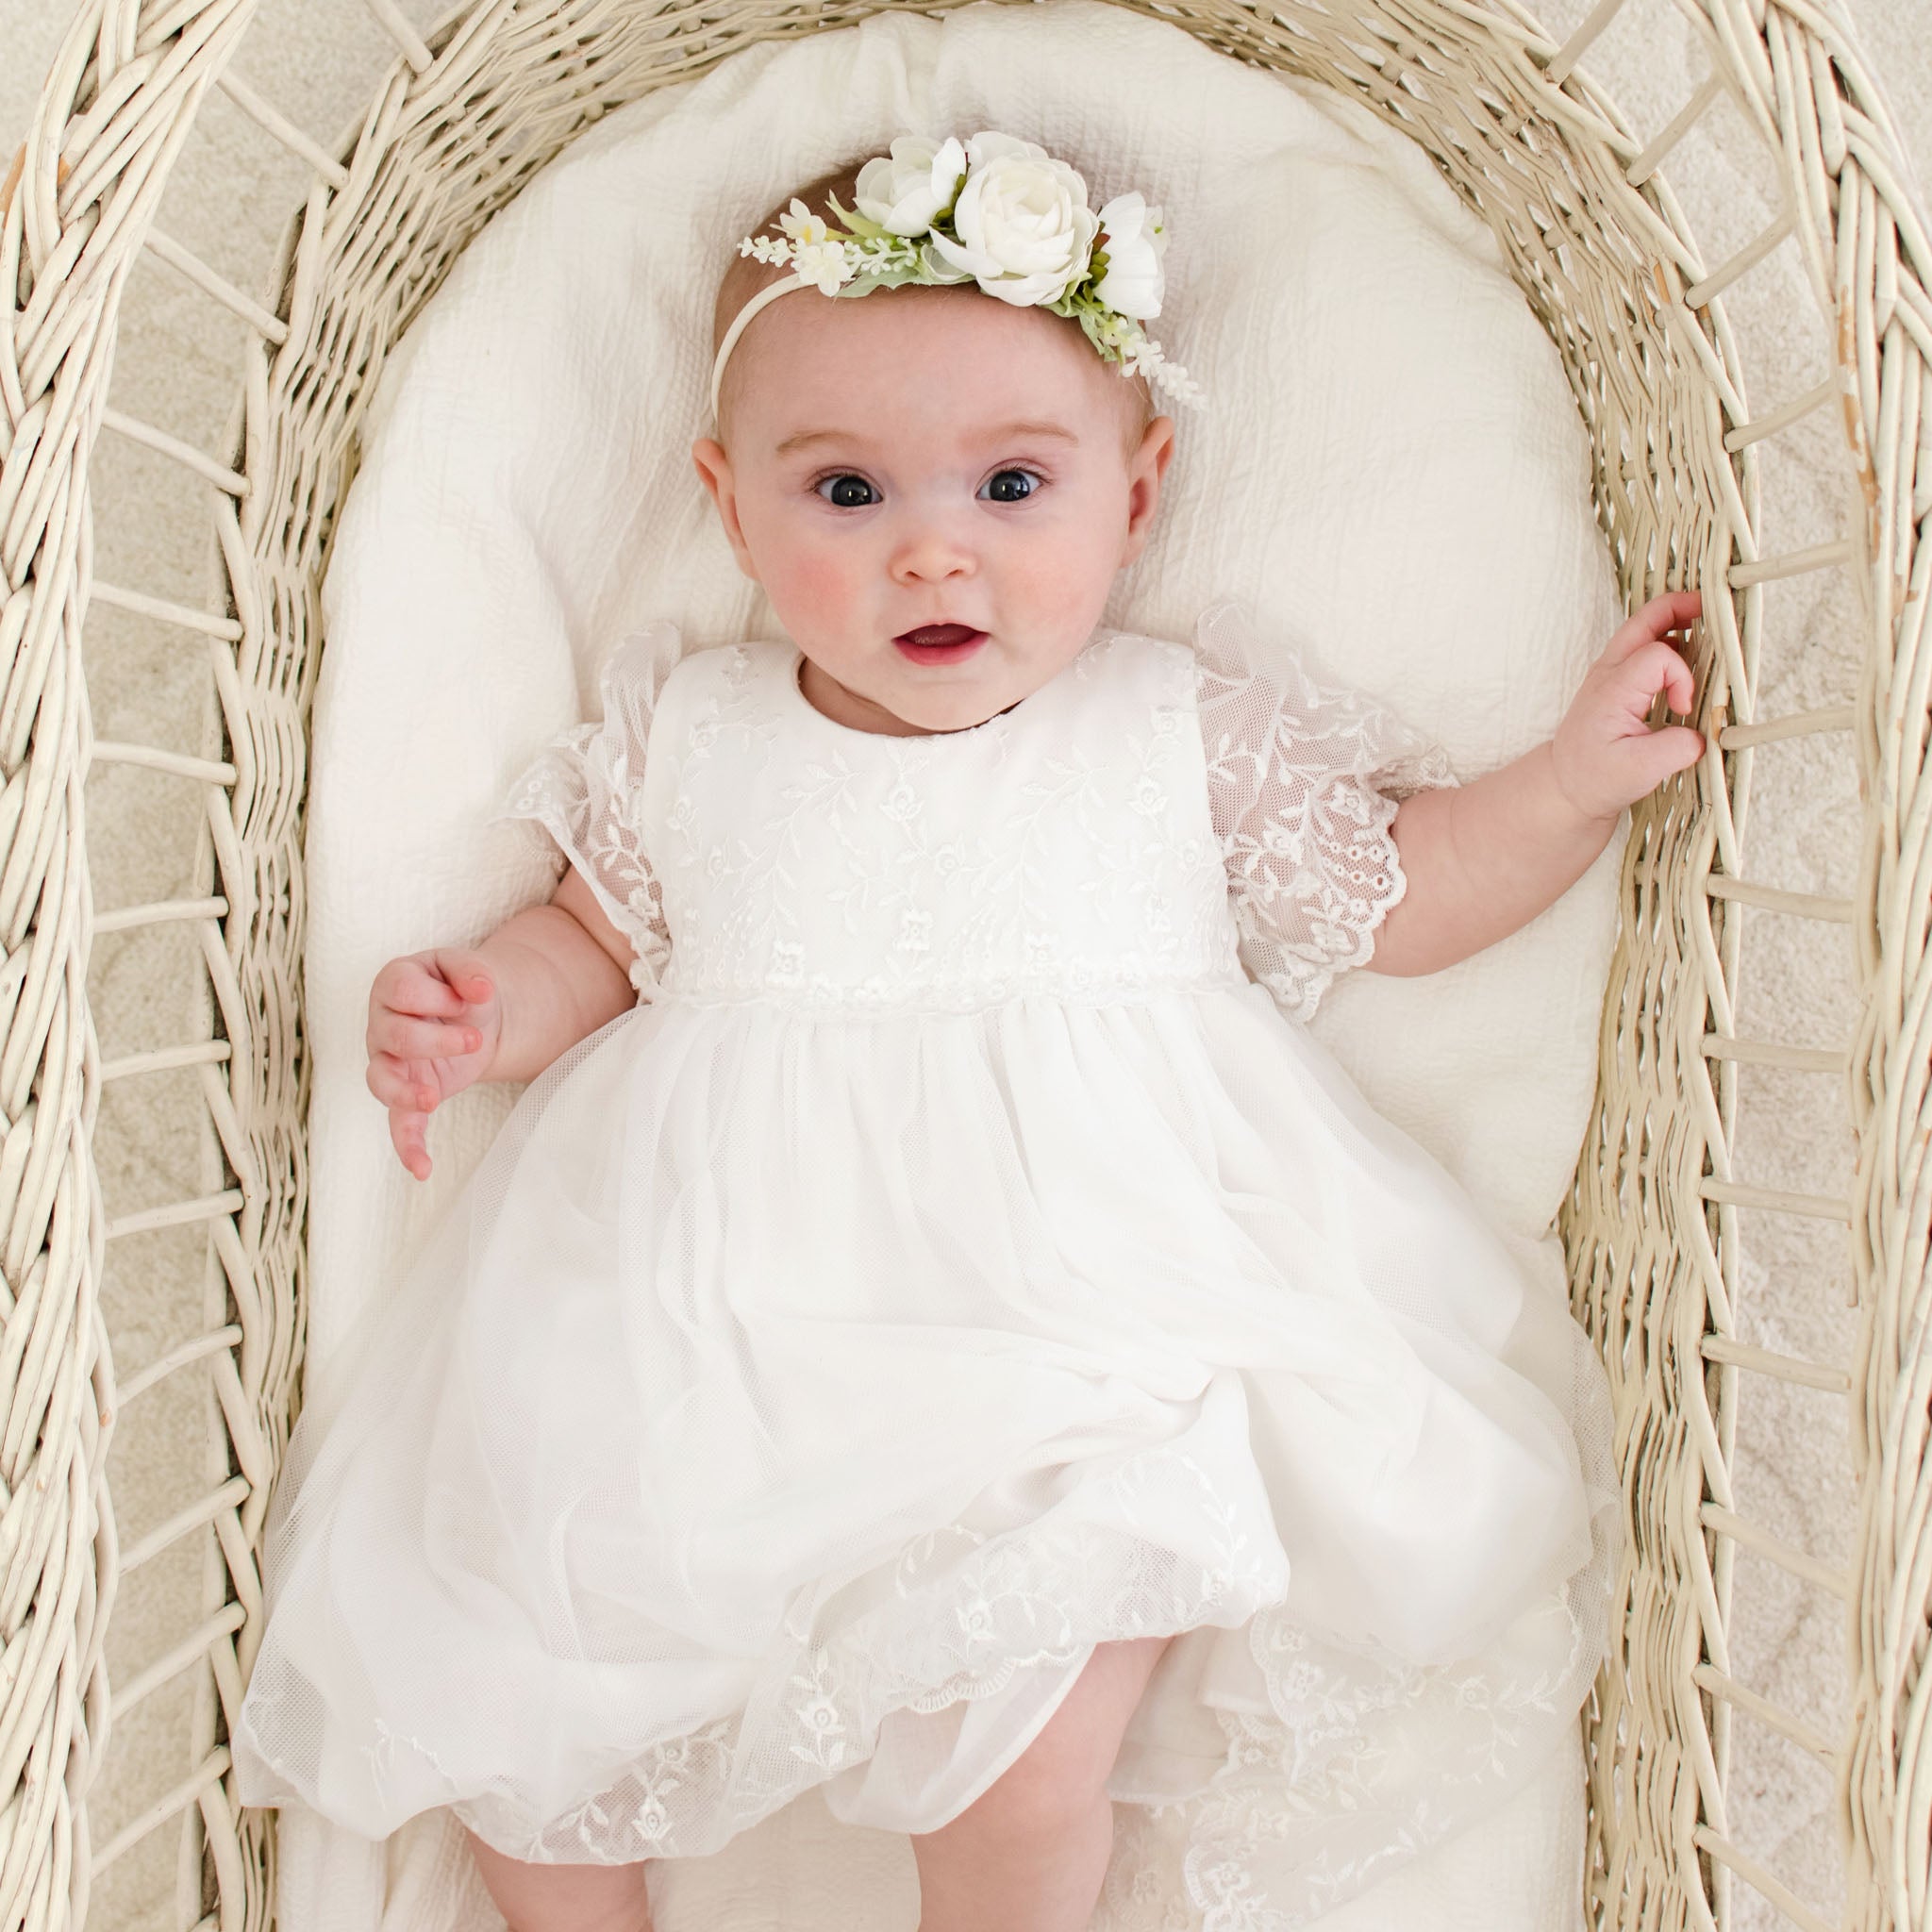 When Should You Buy Infant Flower Girl Dresses? – Baby Beau and Belle